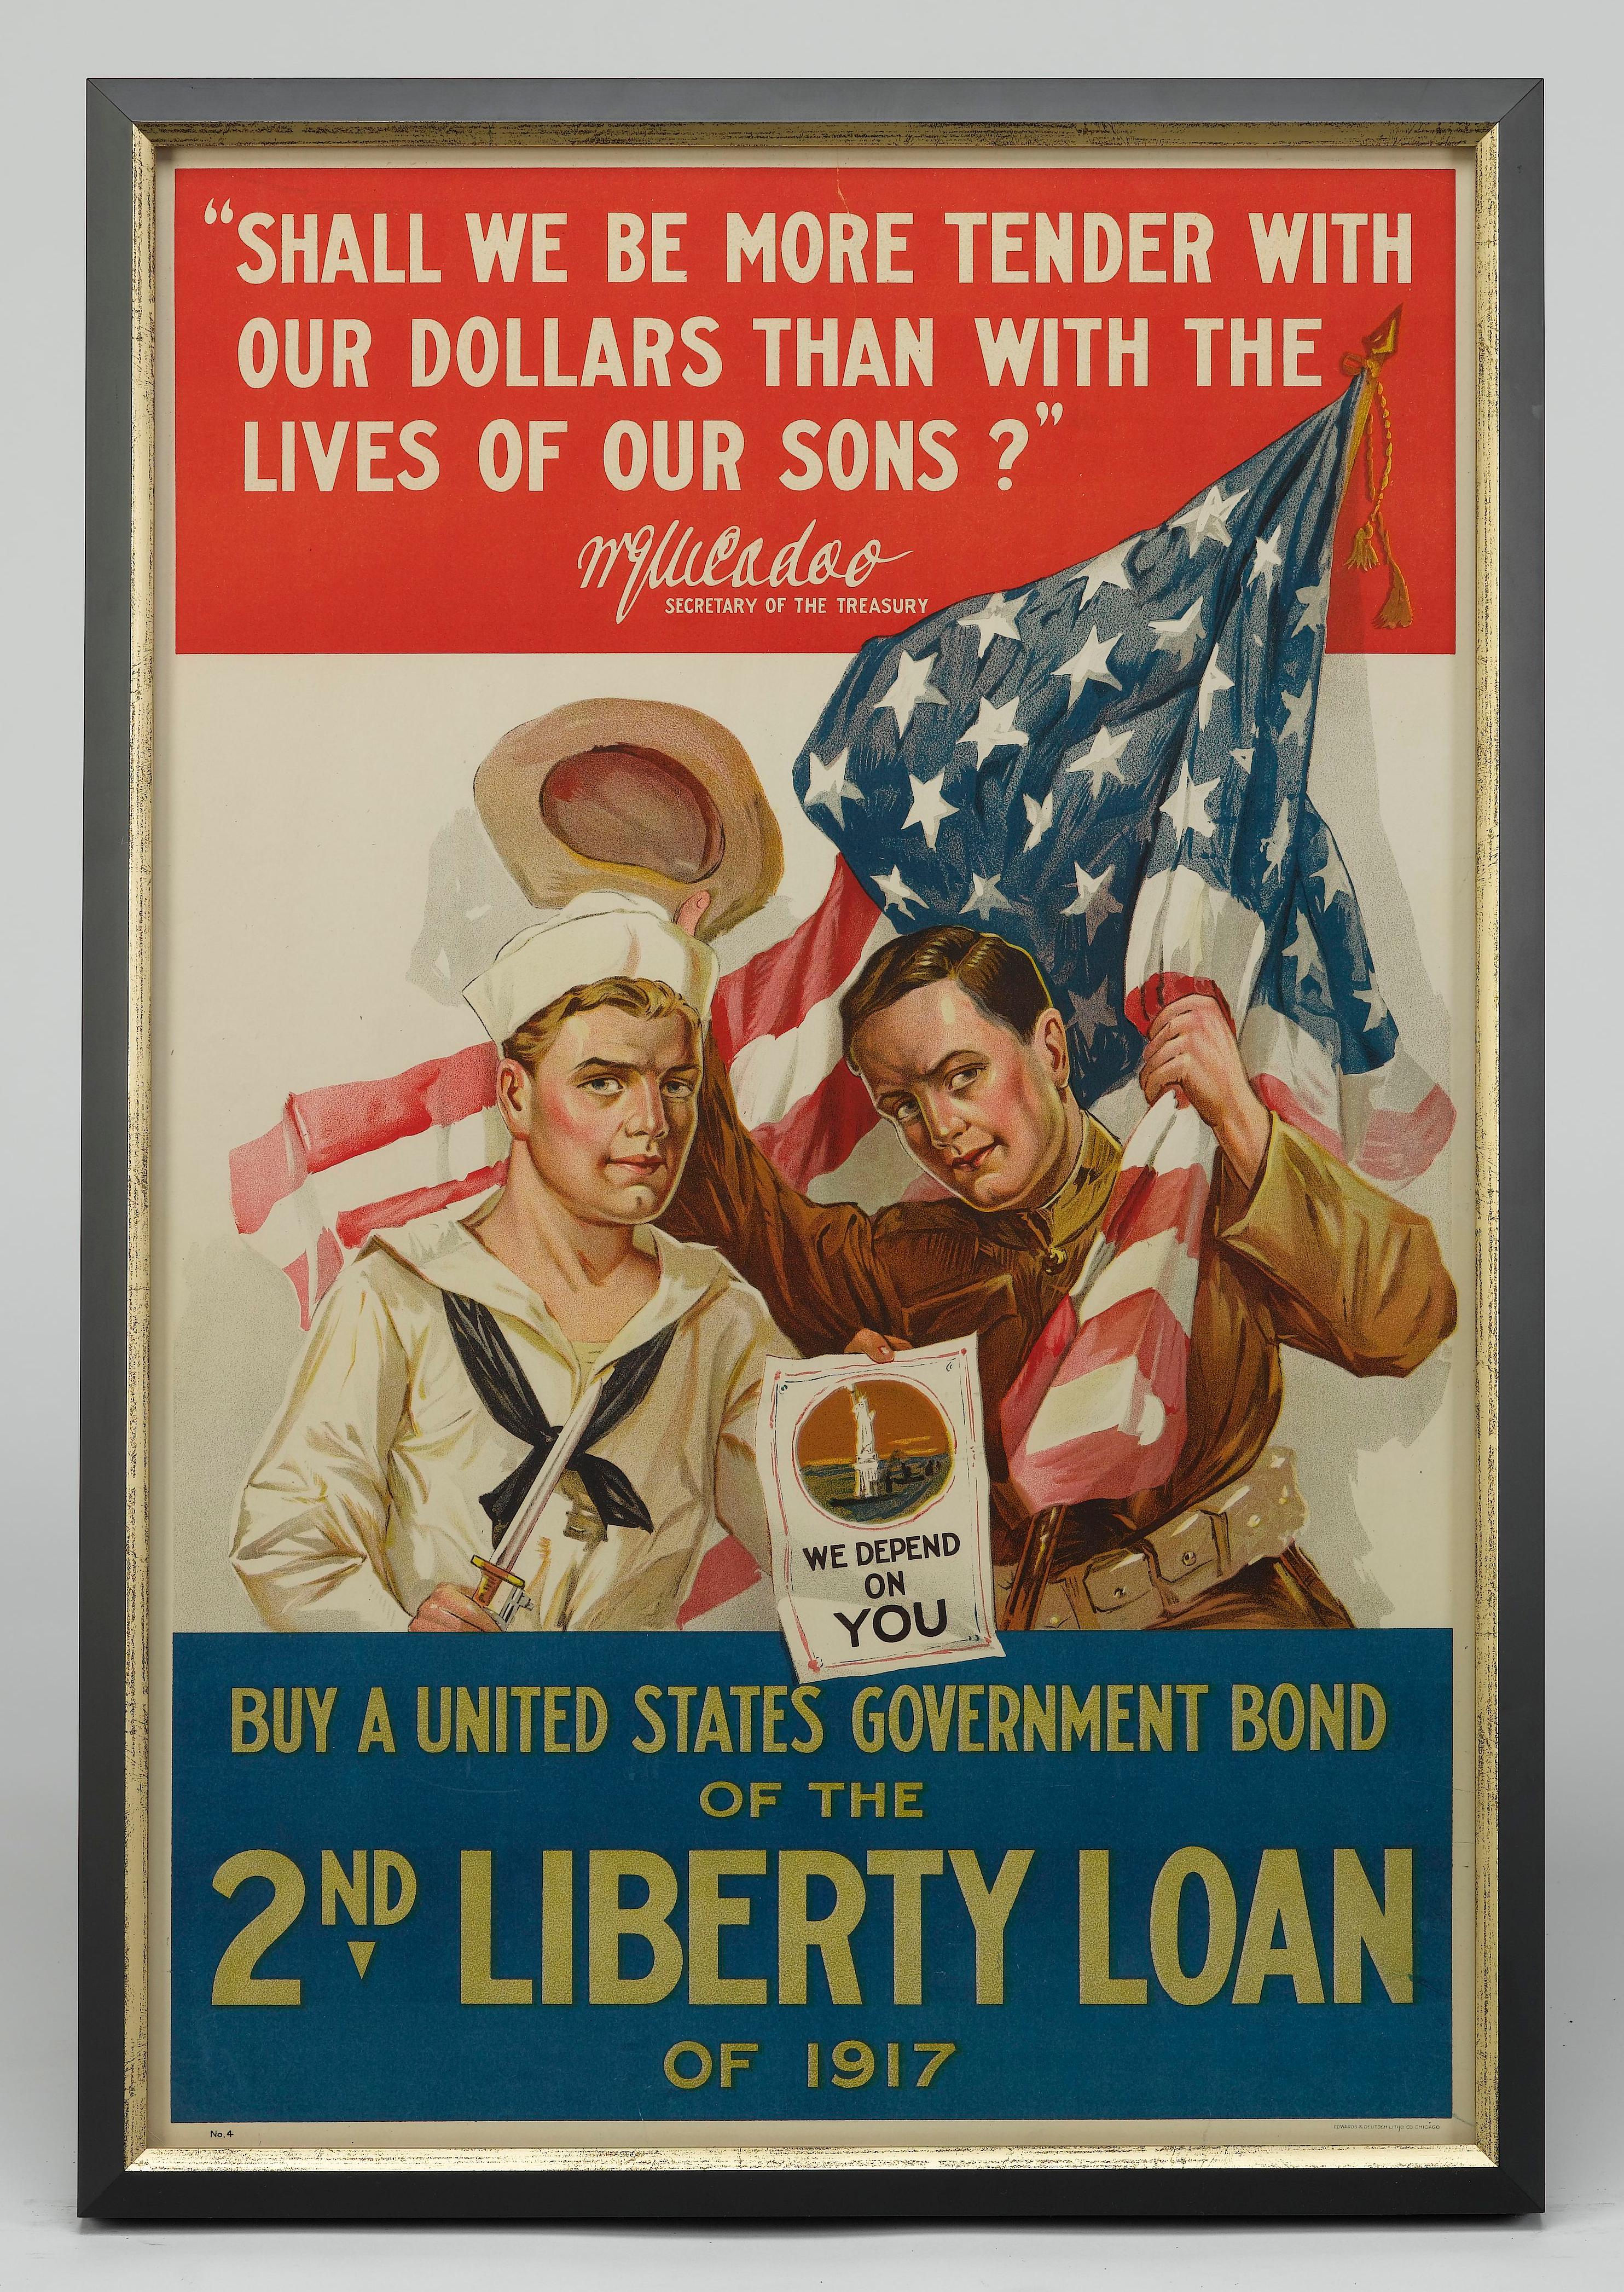 This original WWI poster was issued as part of the Second Liberty Loan run and dates to 1917. The poster depicts a young soldier holding an American flag in one hand and his uniformed hat in the other. Next to him, a sailor holds a leaflet